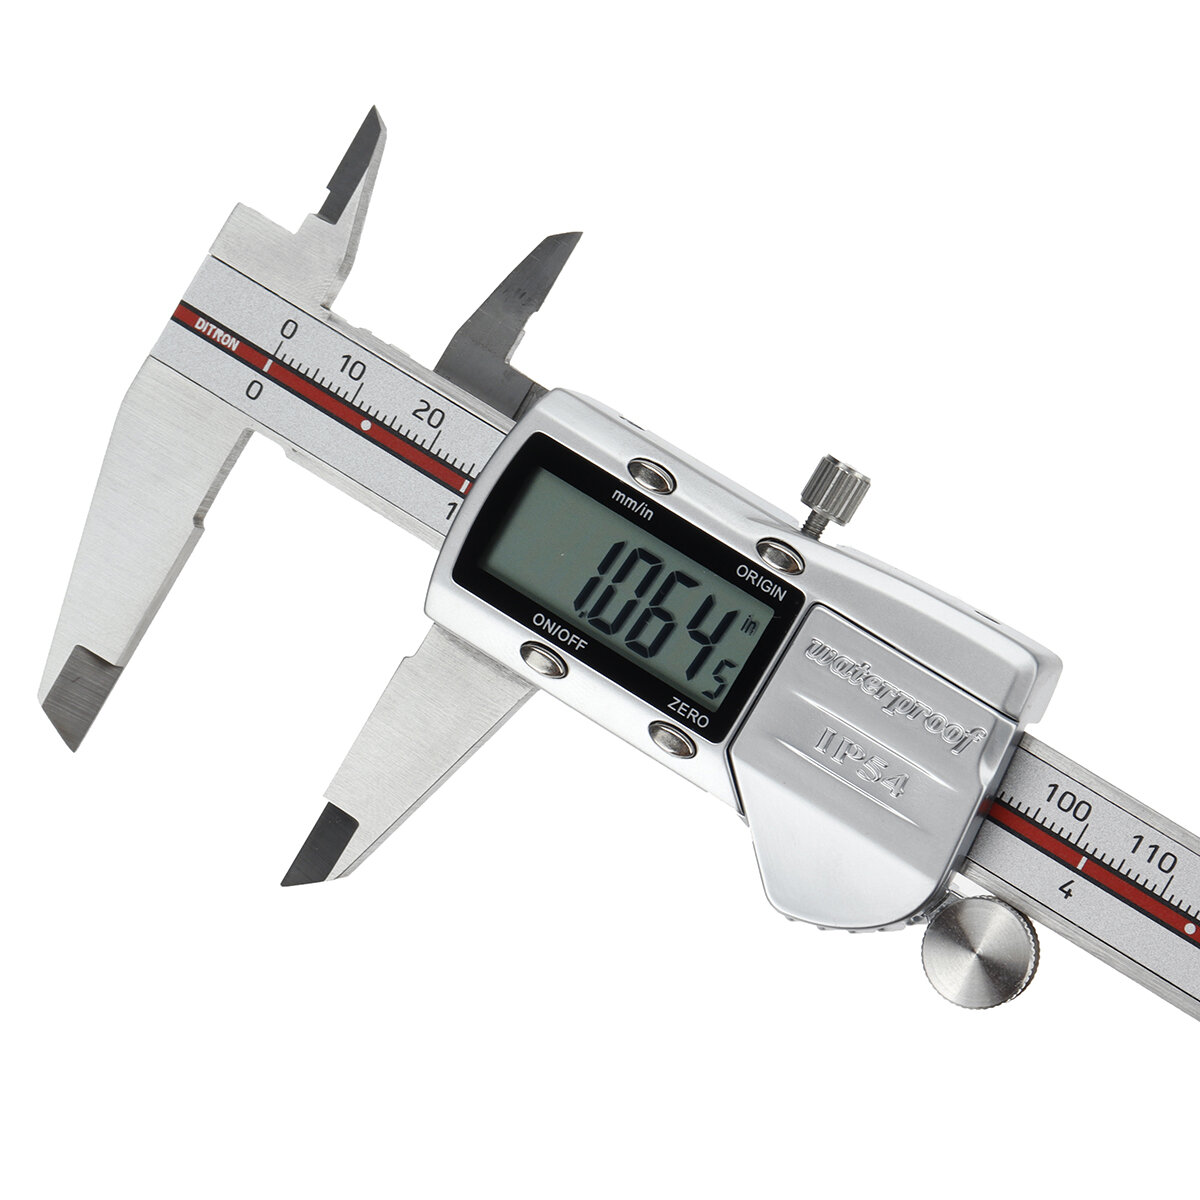 best price,ditron,6,inch,150mm,digital,vernier,caliper,stainless,steel,electronic,coupon,price,discount